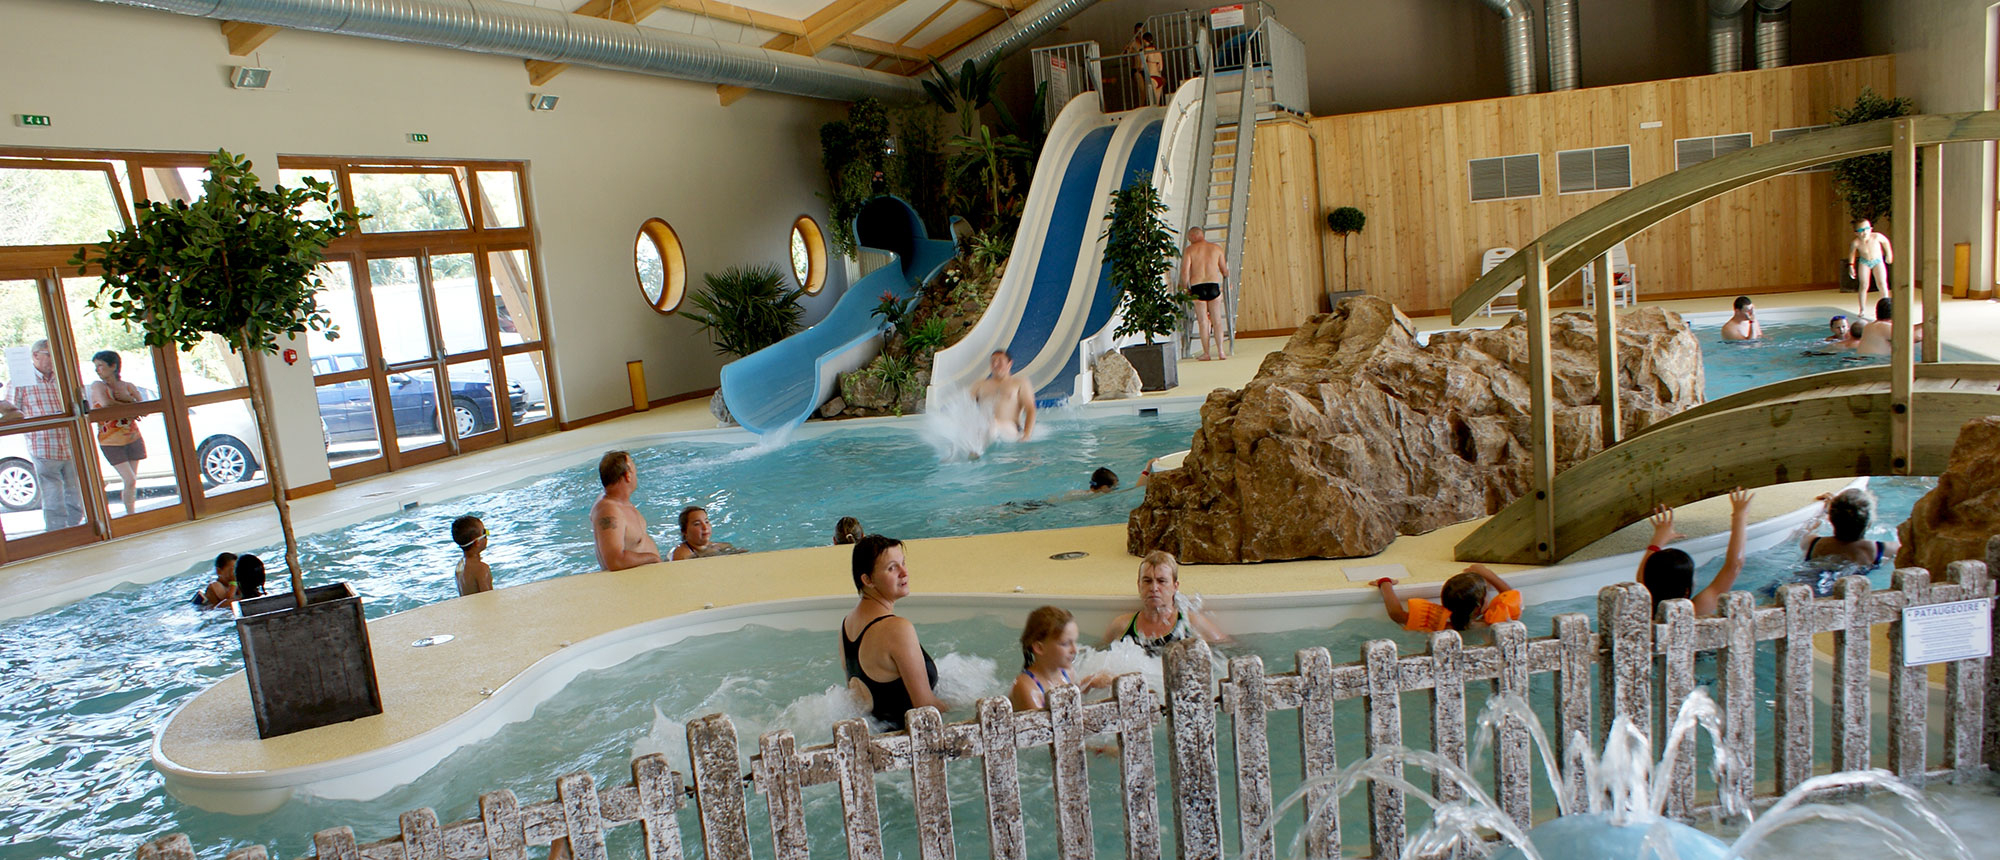 Camping Somme Avec Piscine Couverte | Camping Le Champ Neuf destiné Camping 5 Etoiles Normandie Avec Piscine Couverte